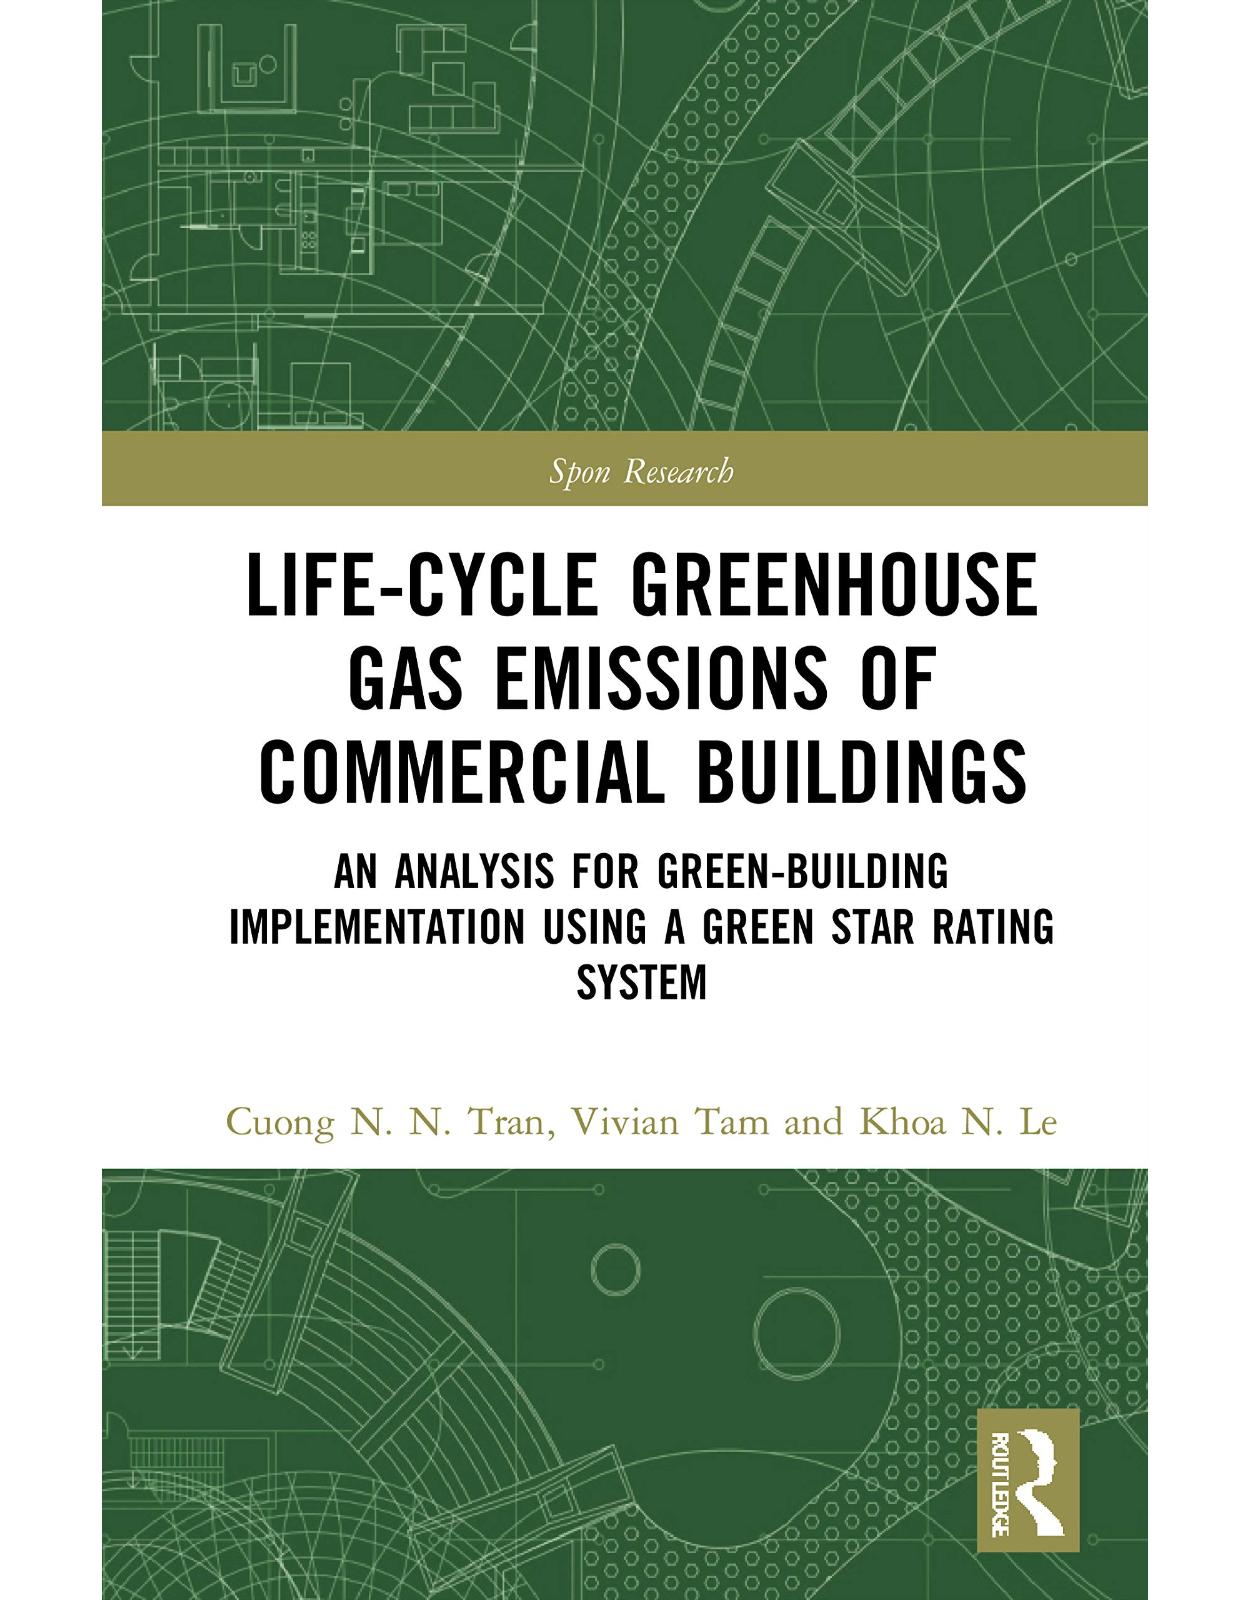 Life-Cycle Greenhouse Gas Emissions of Commercial Buildings: An Analysis for Green-Building Implementation Using A Green Star Rating System